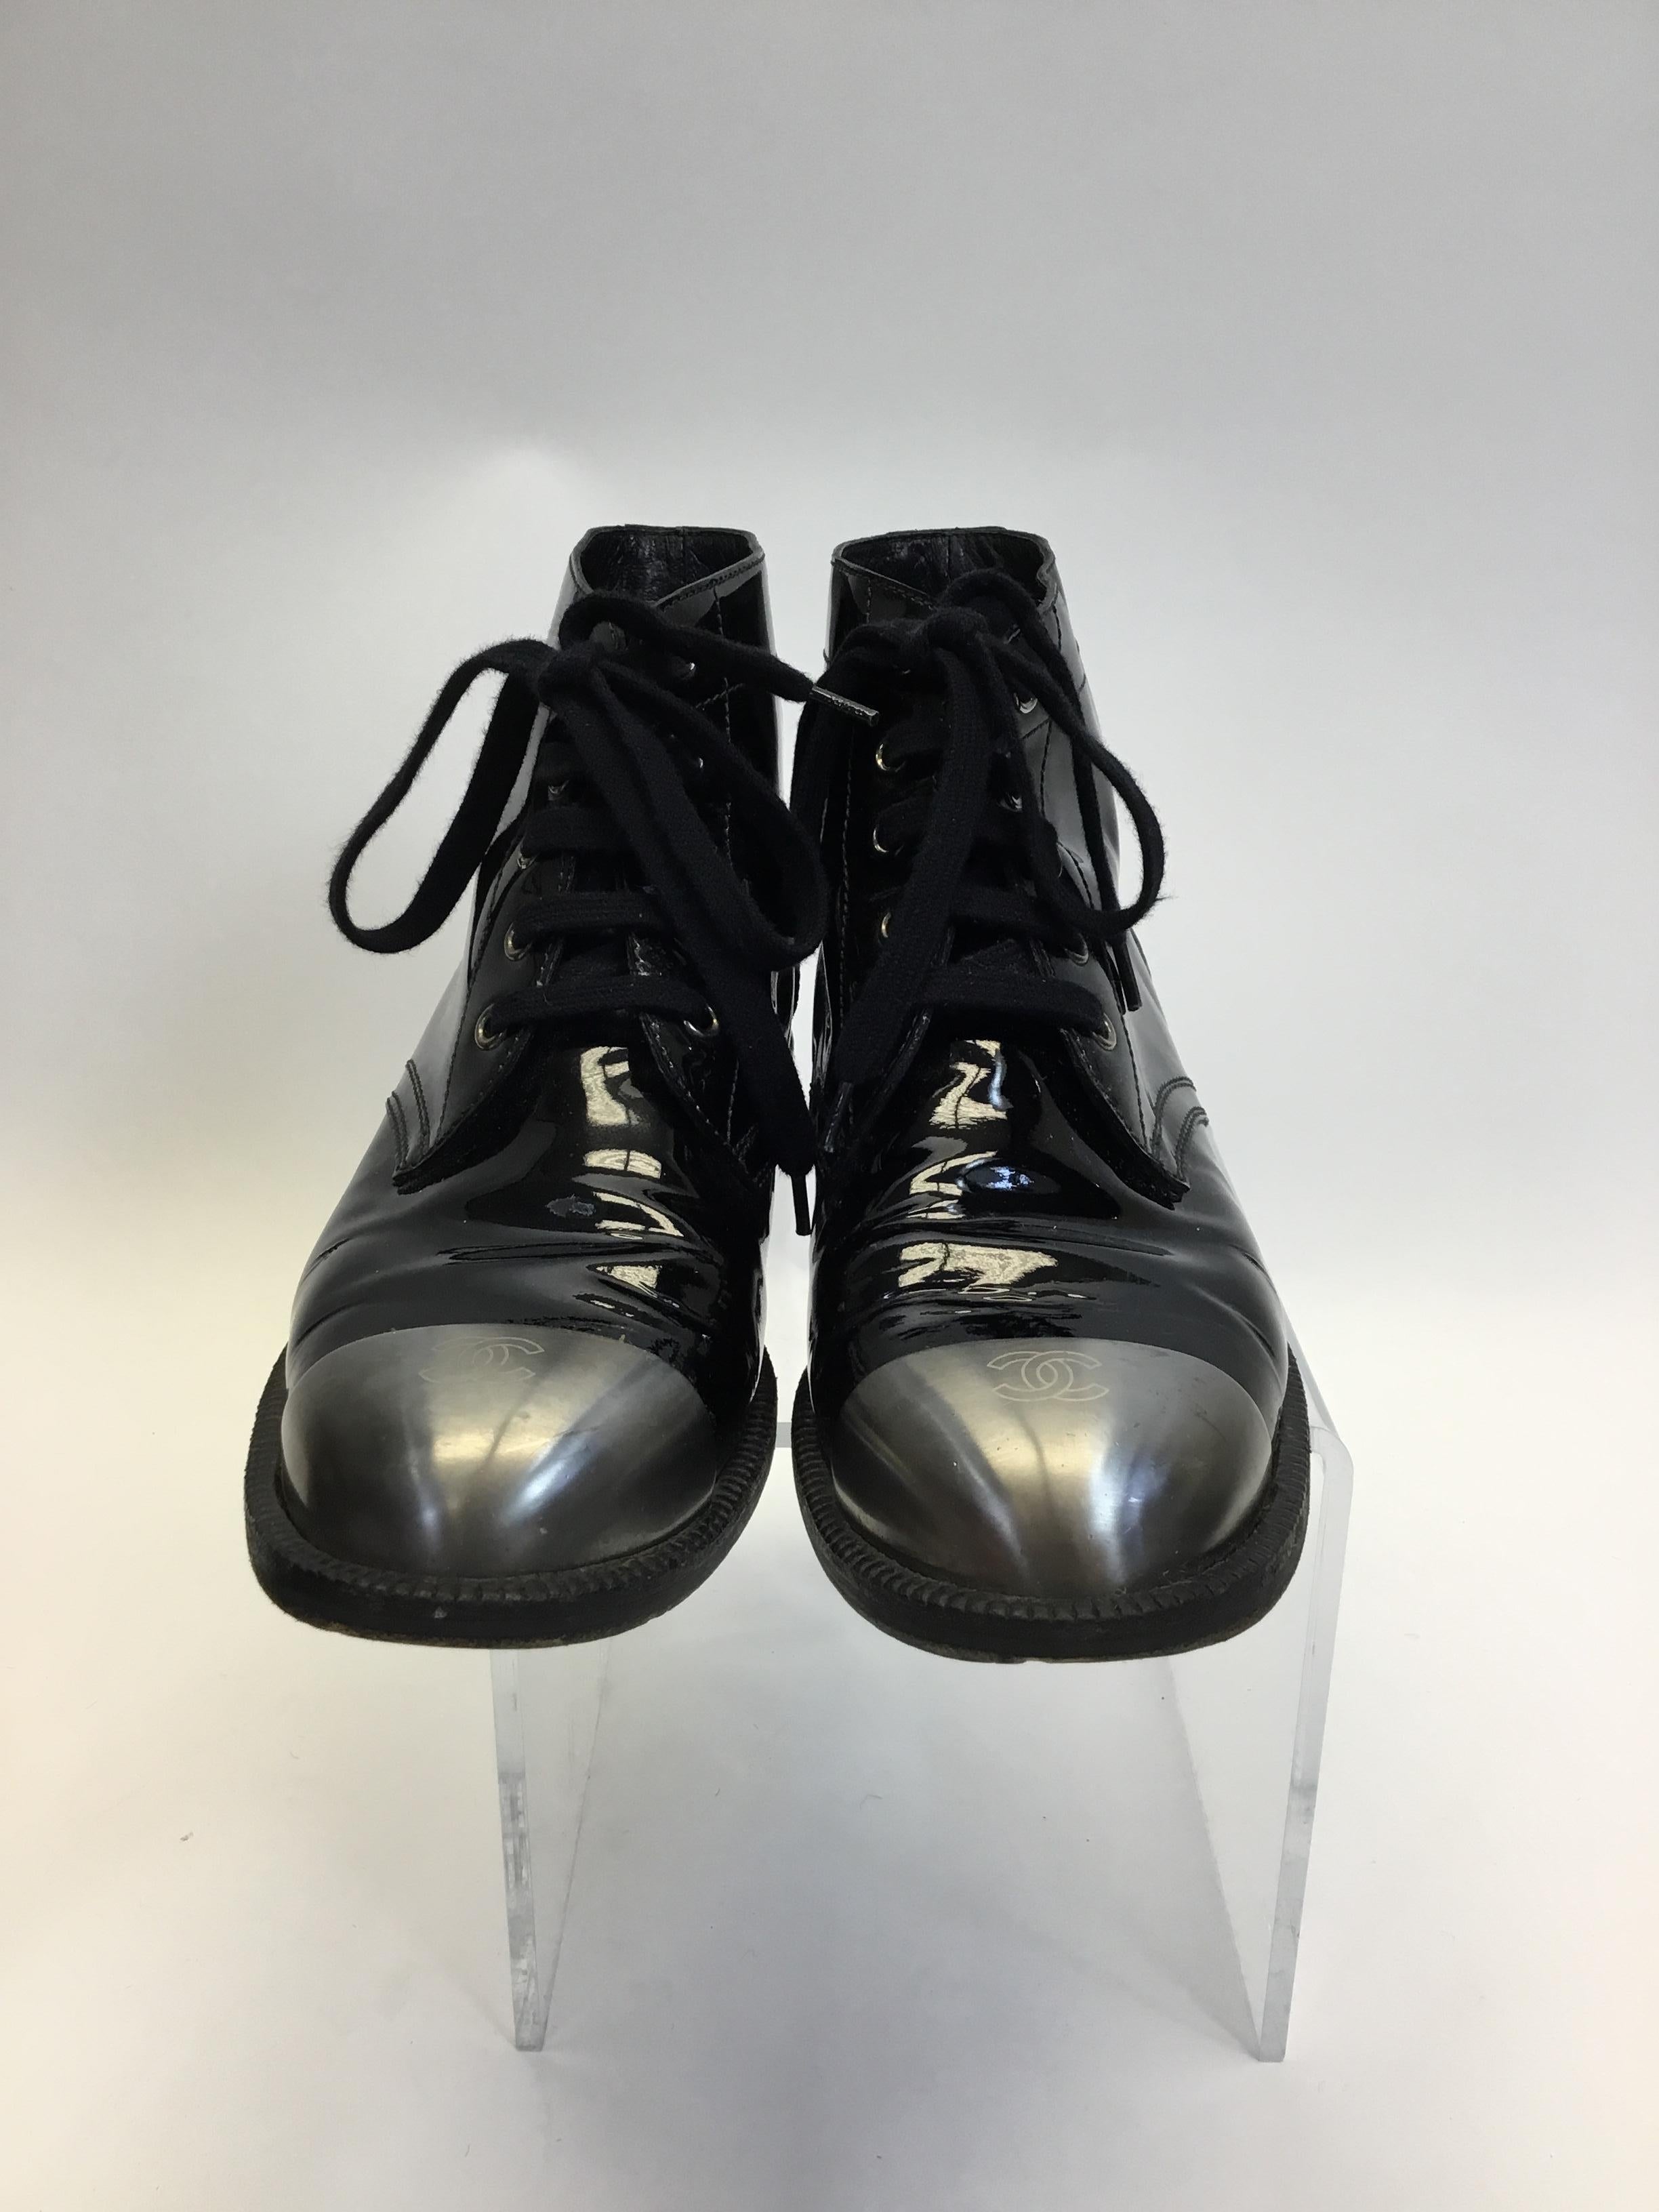 Chanel Patent Leather Black Ankle Boot with Silver Toe
$450
Made in Italy
Size 40